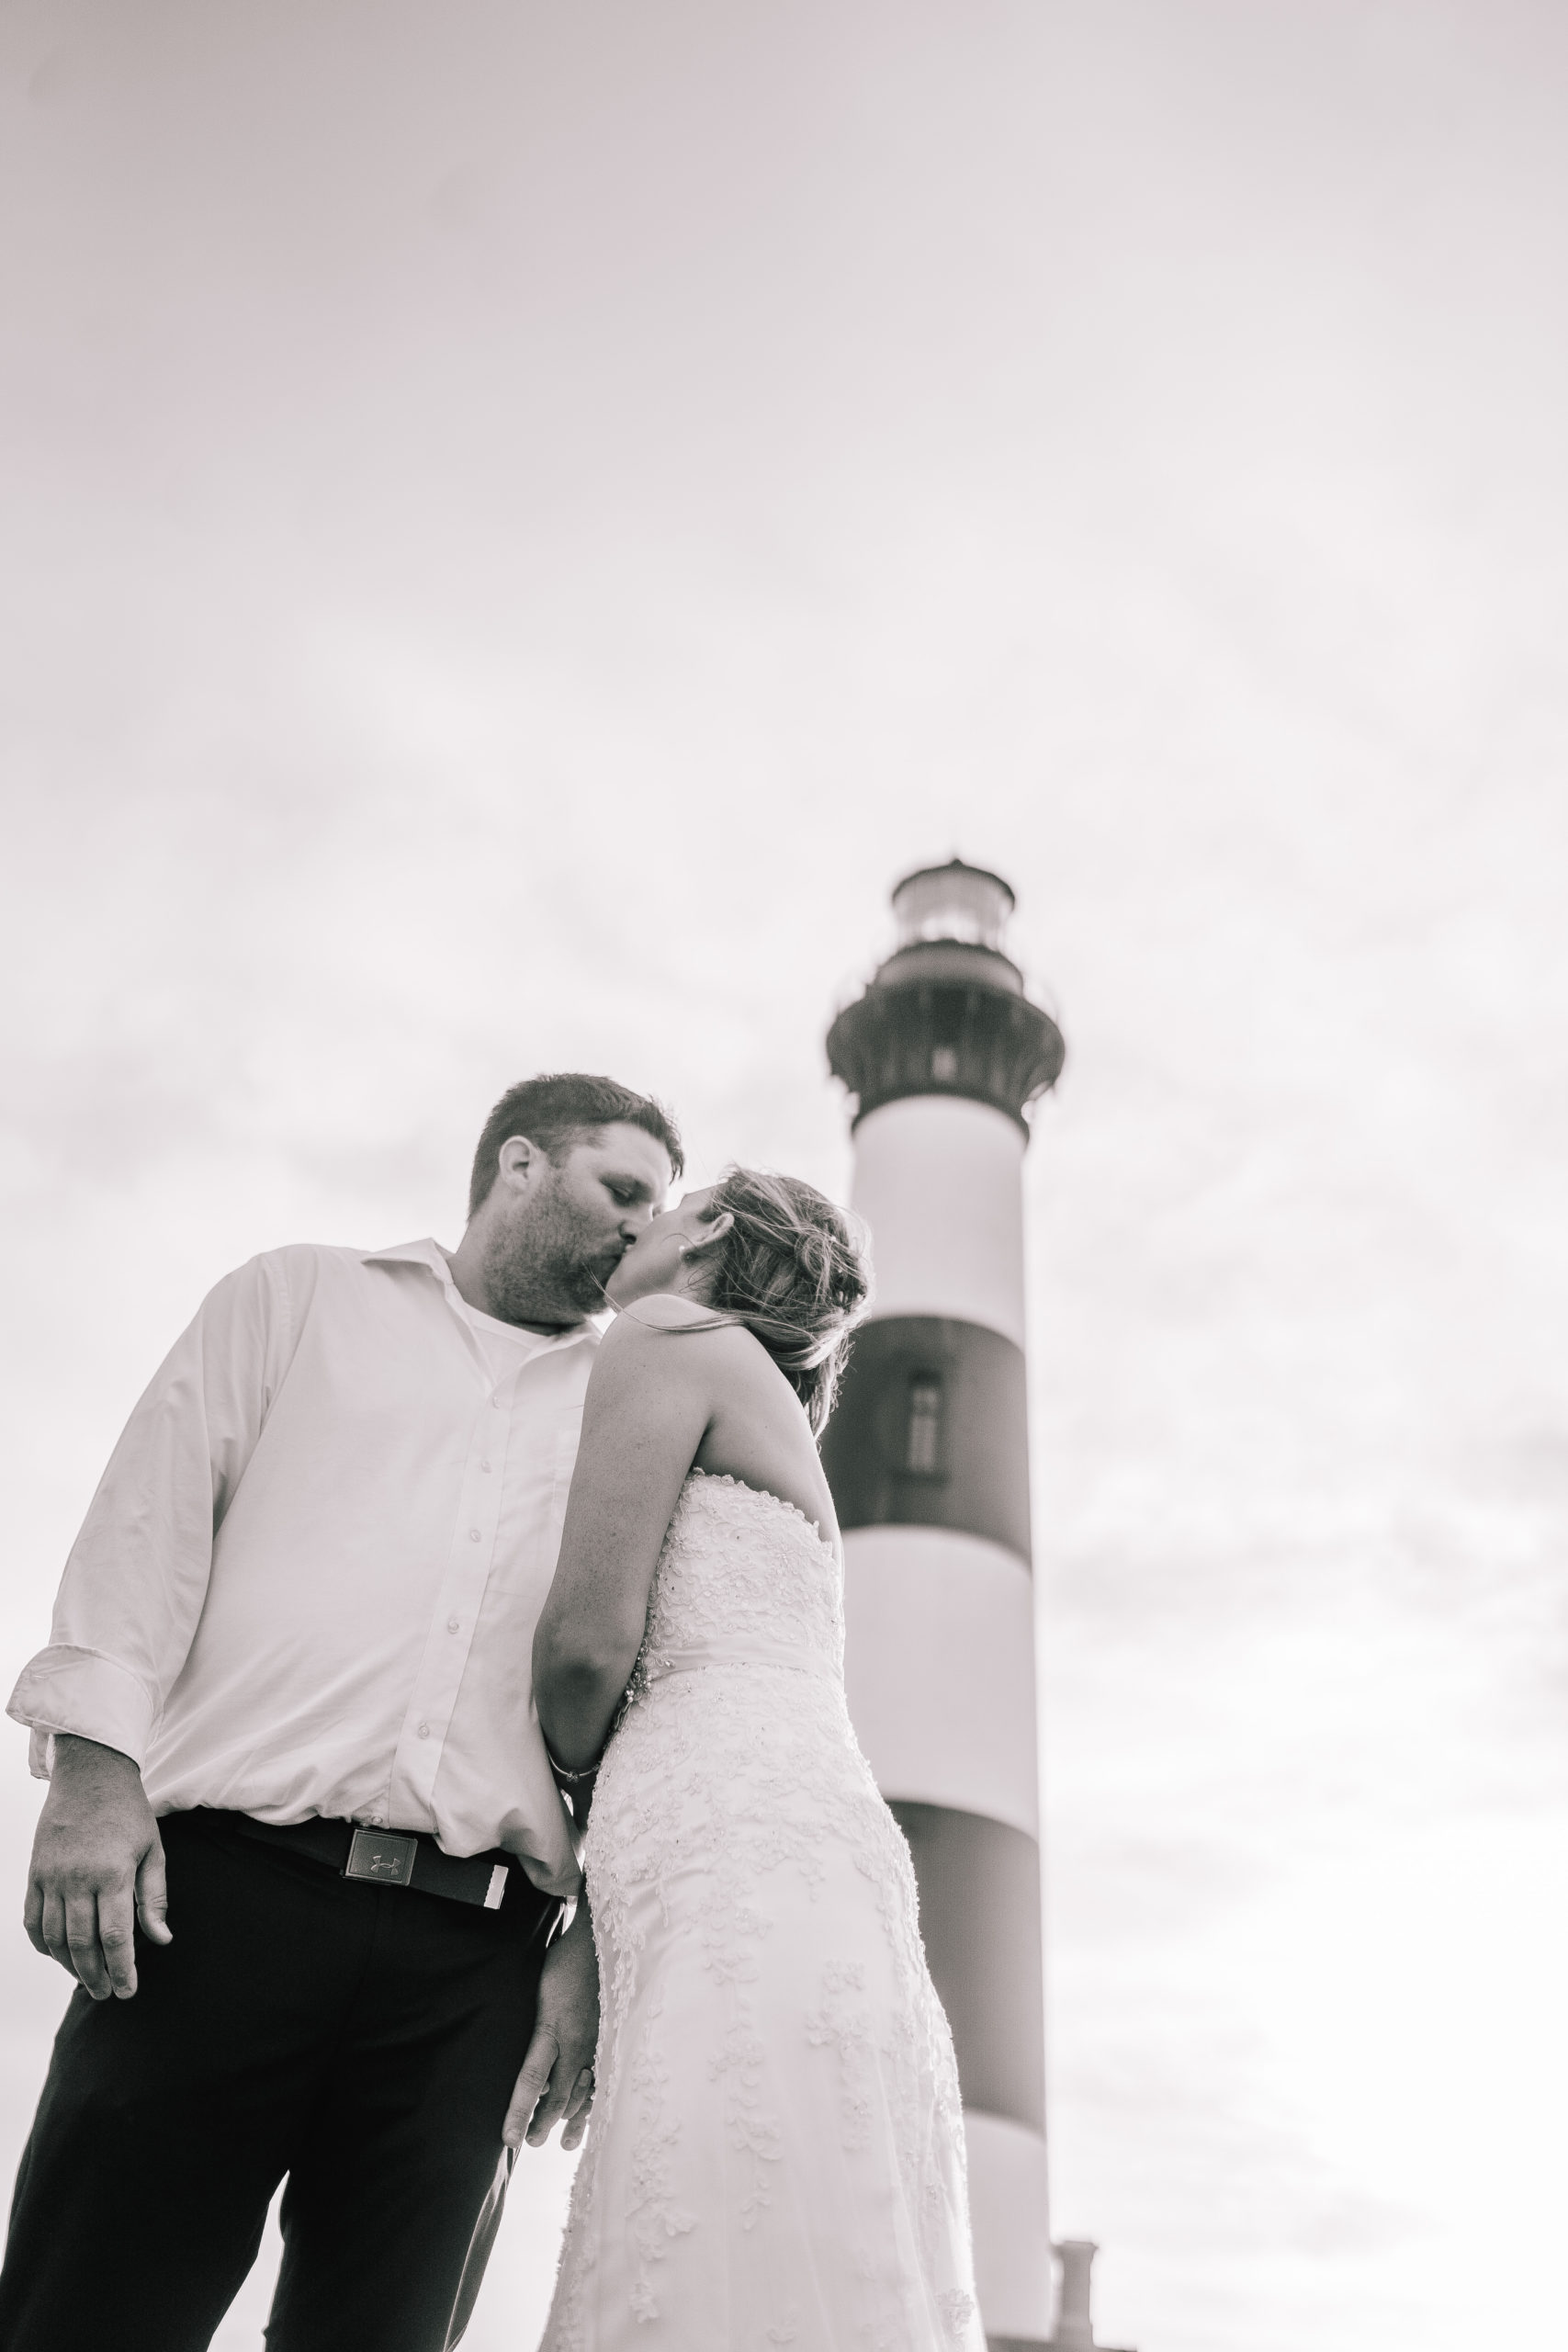 black and white photo of a wedding couple in front of a lighthouse